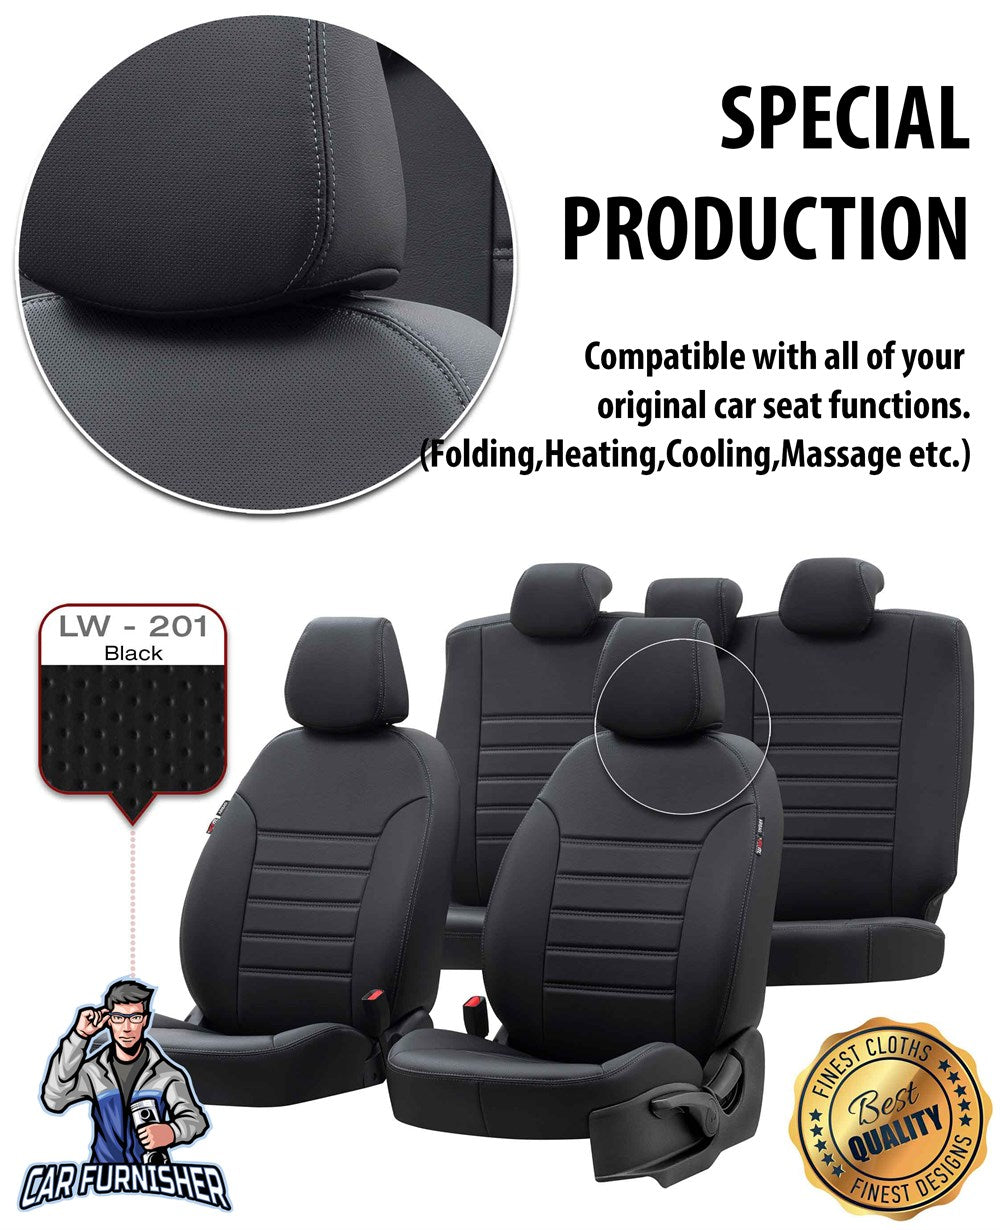 Toyota Hilux Seat Cover Istanbul Leather Design Black Leather